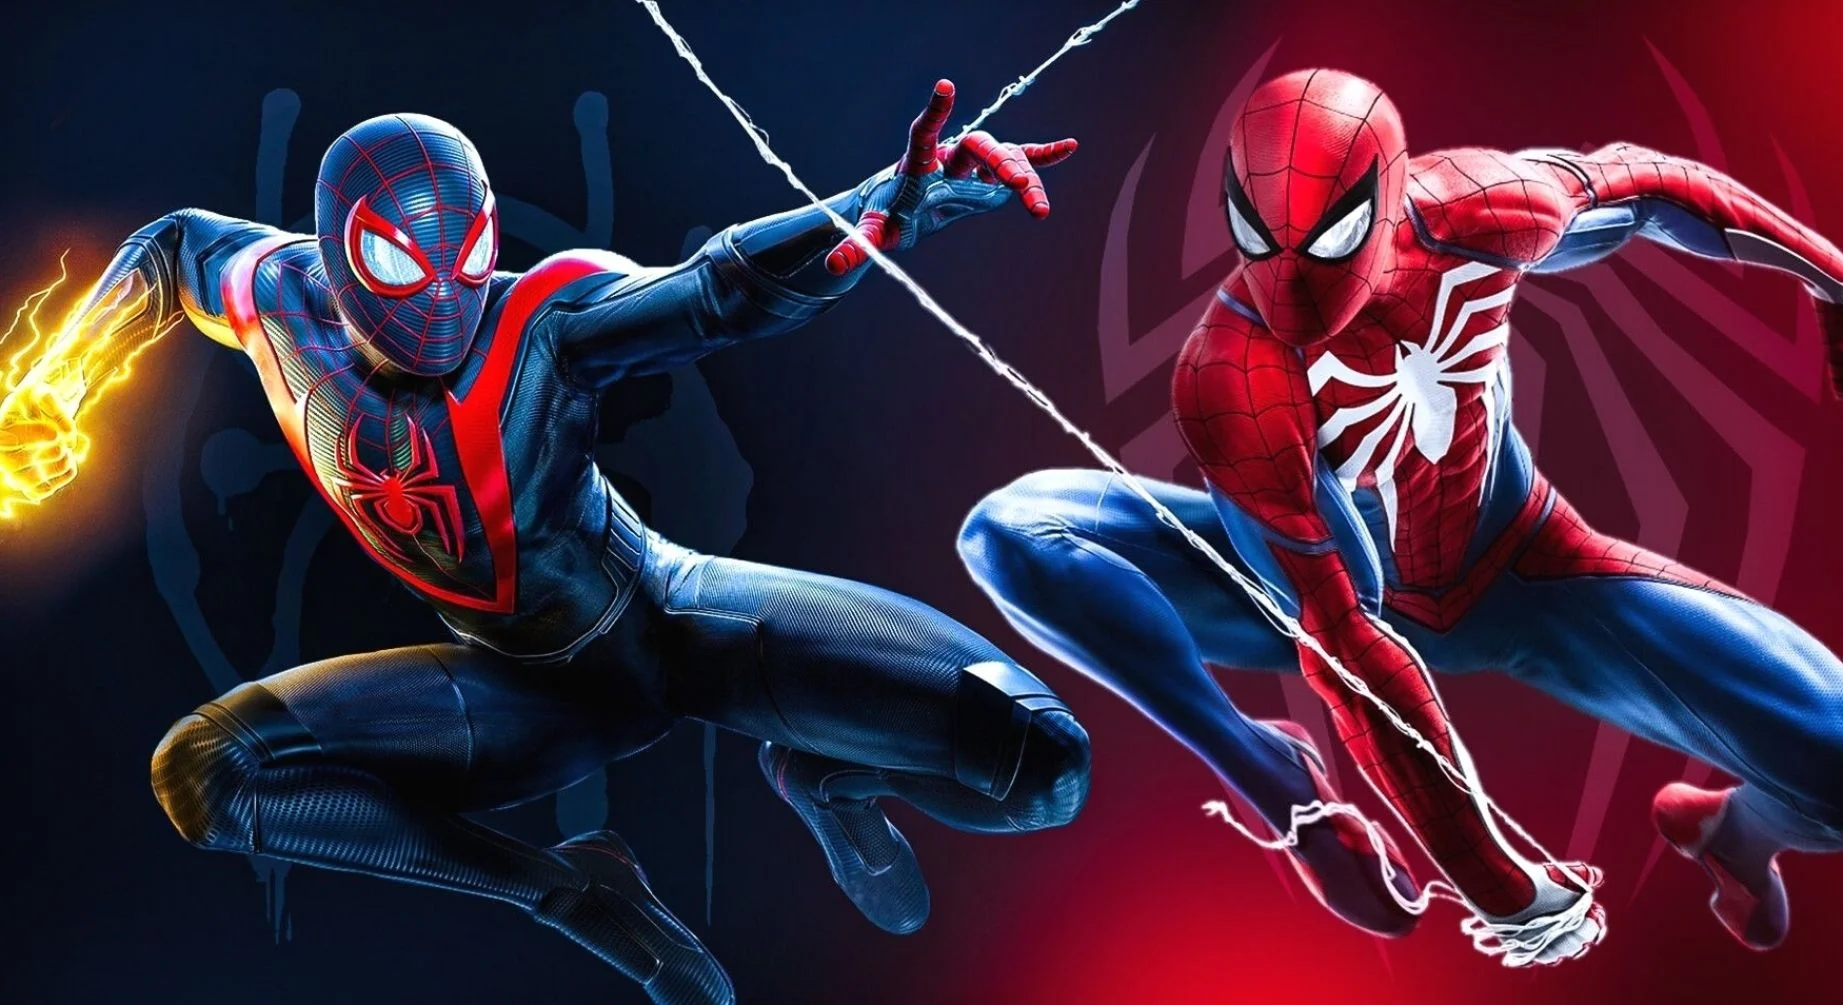 Marvel's Spider-Man 2 title track now available on music services